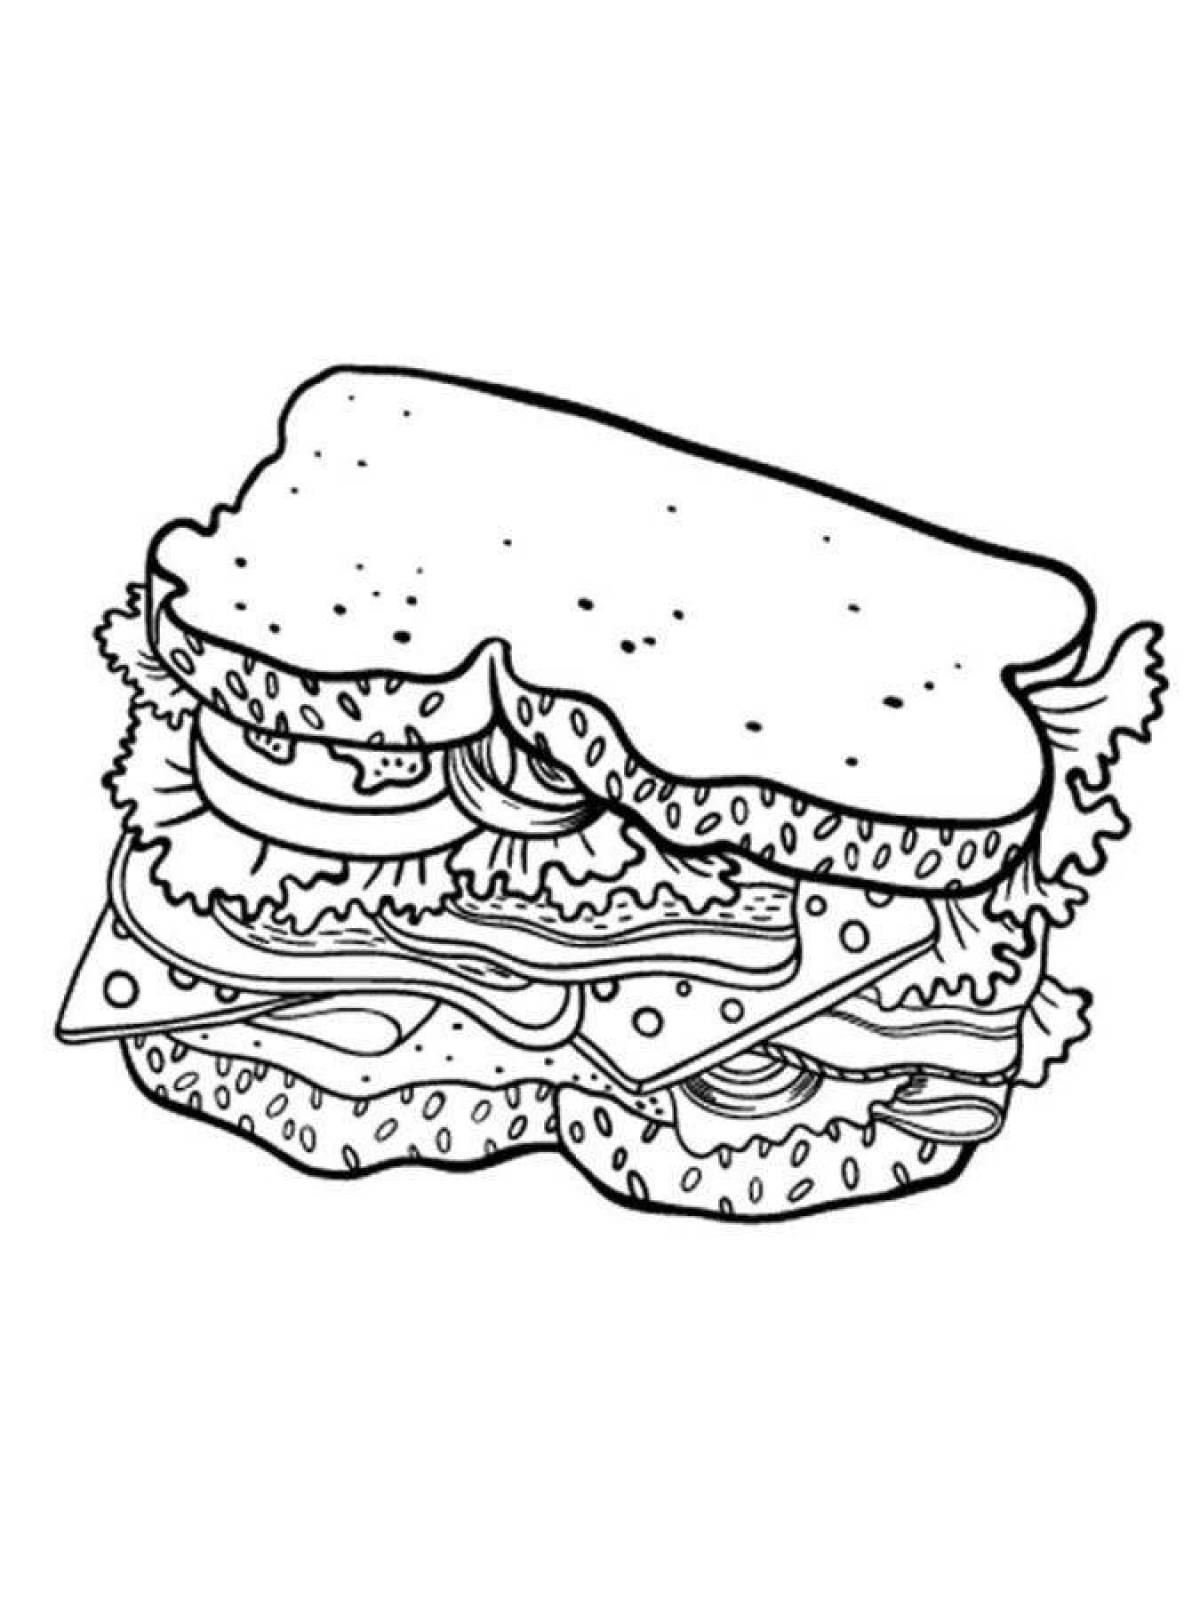 Comforting sandwich coloring book